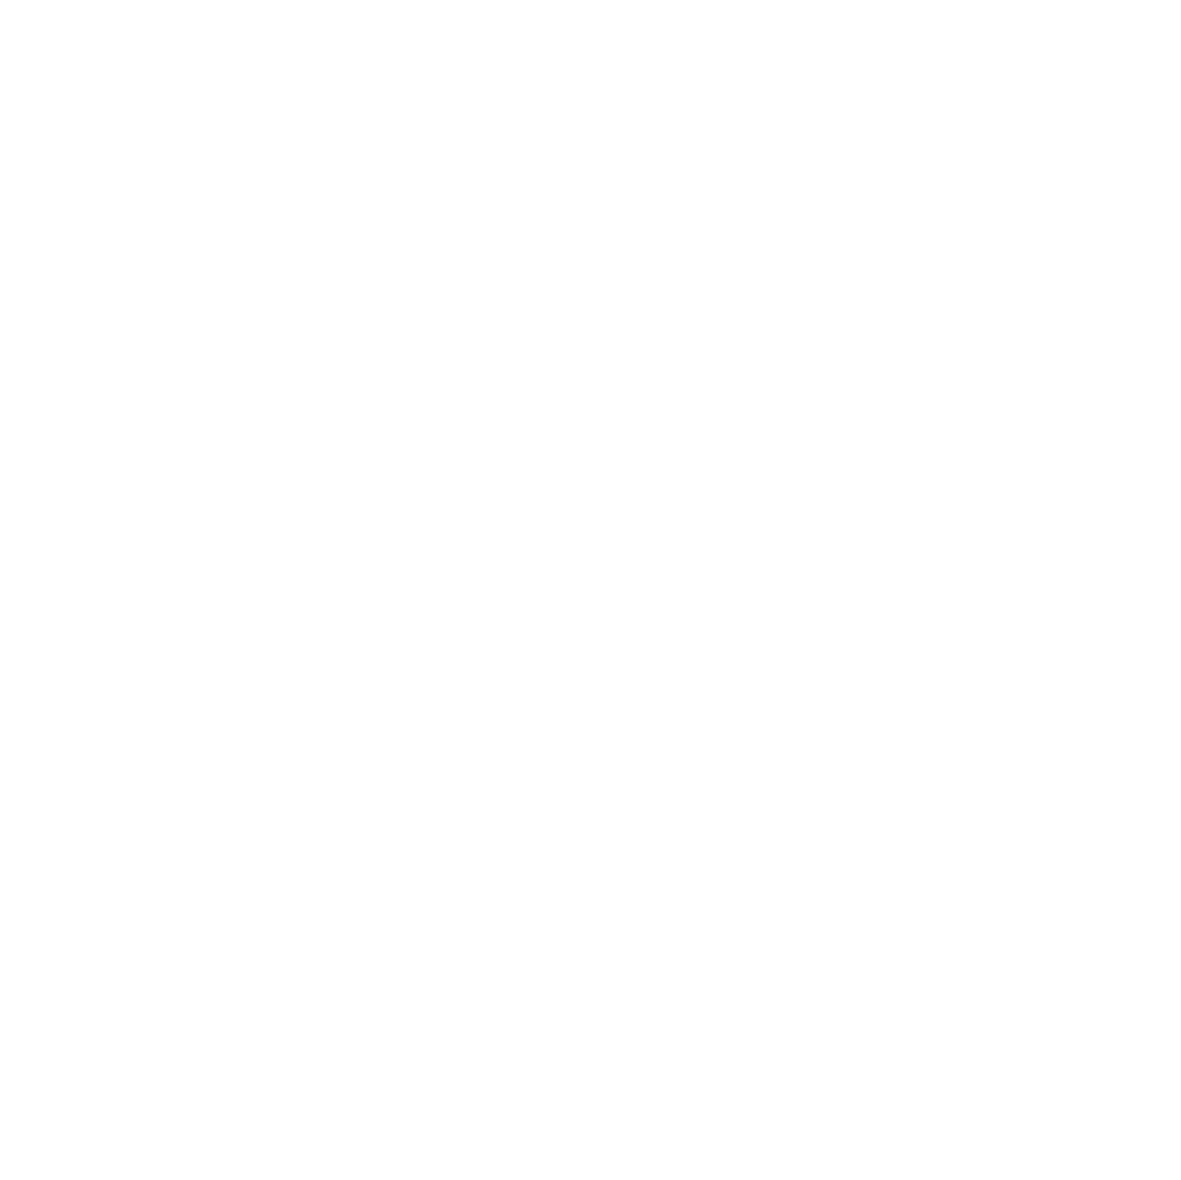 Location Pin Icon Graphic PNG image